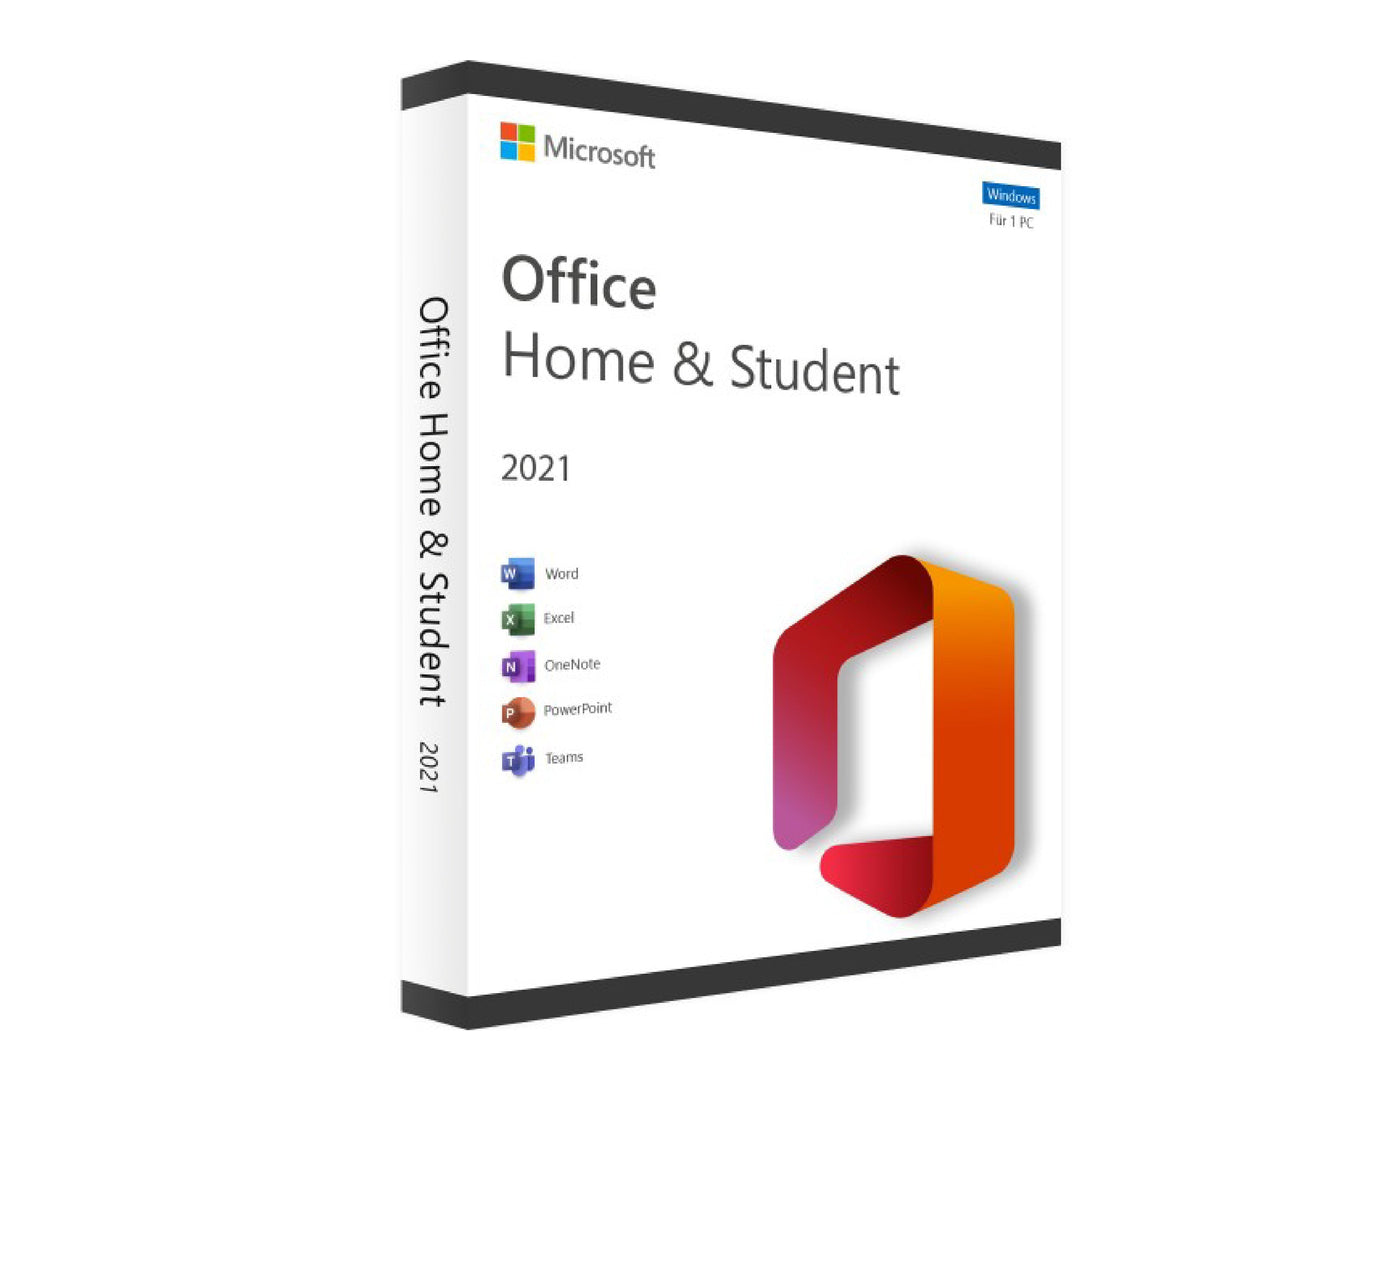 #Microsoft Office 2021 Home and Student Windows#